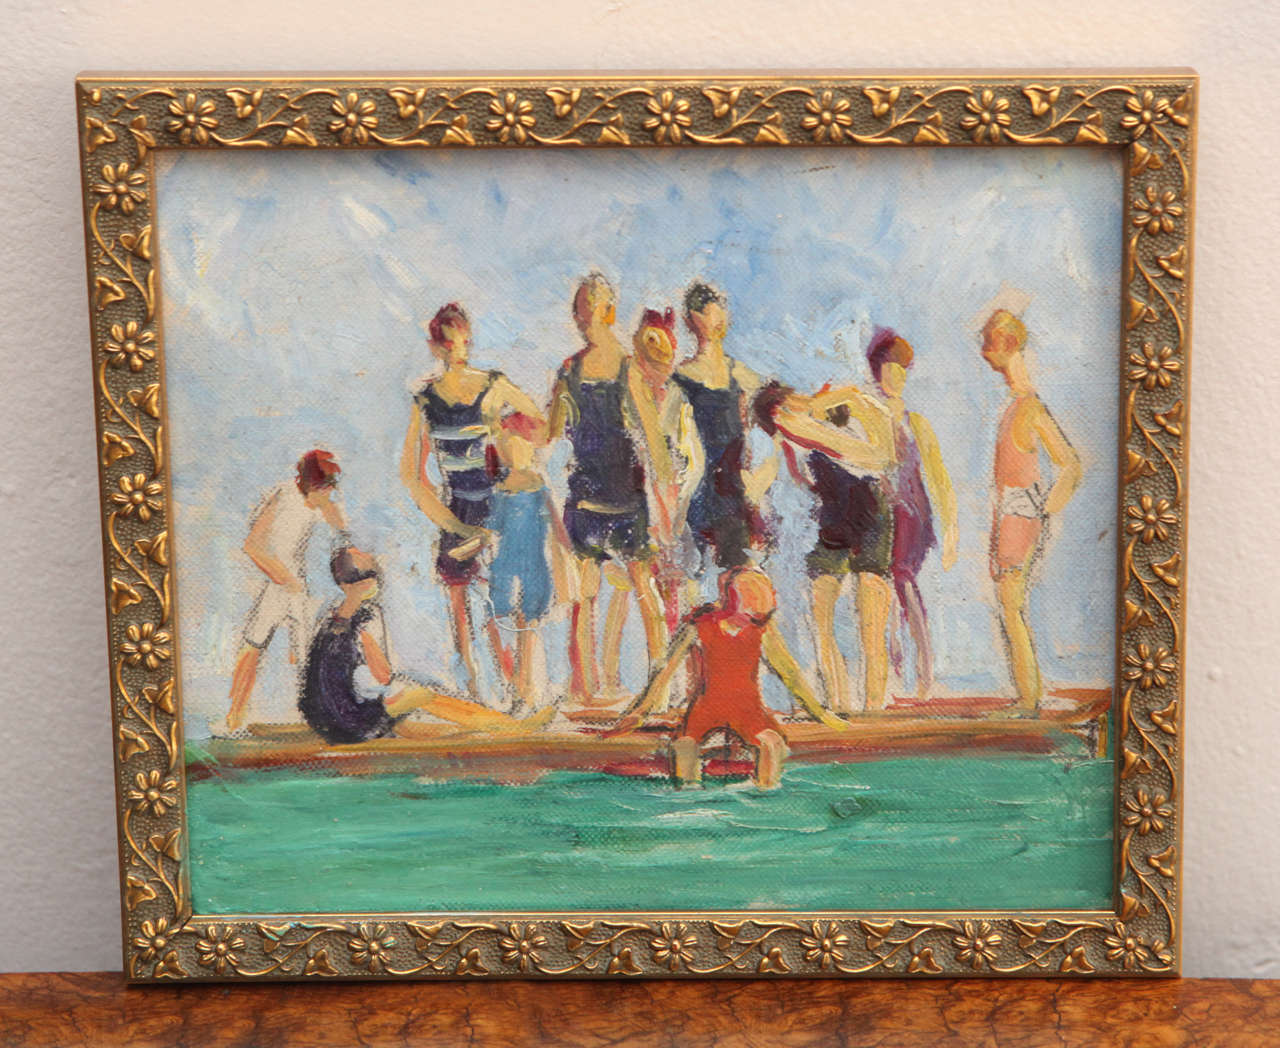 Charming small painting of swimmers on a raft.  Rachel Hartley (1884-1955) was a New York  painter who studied and taught at the Art Students League.  Her father was sculptor Jonathan Hartley and her grandfather was noted painter George Inness. 